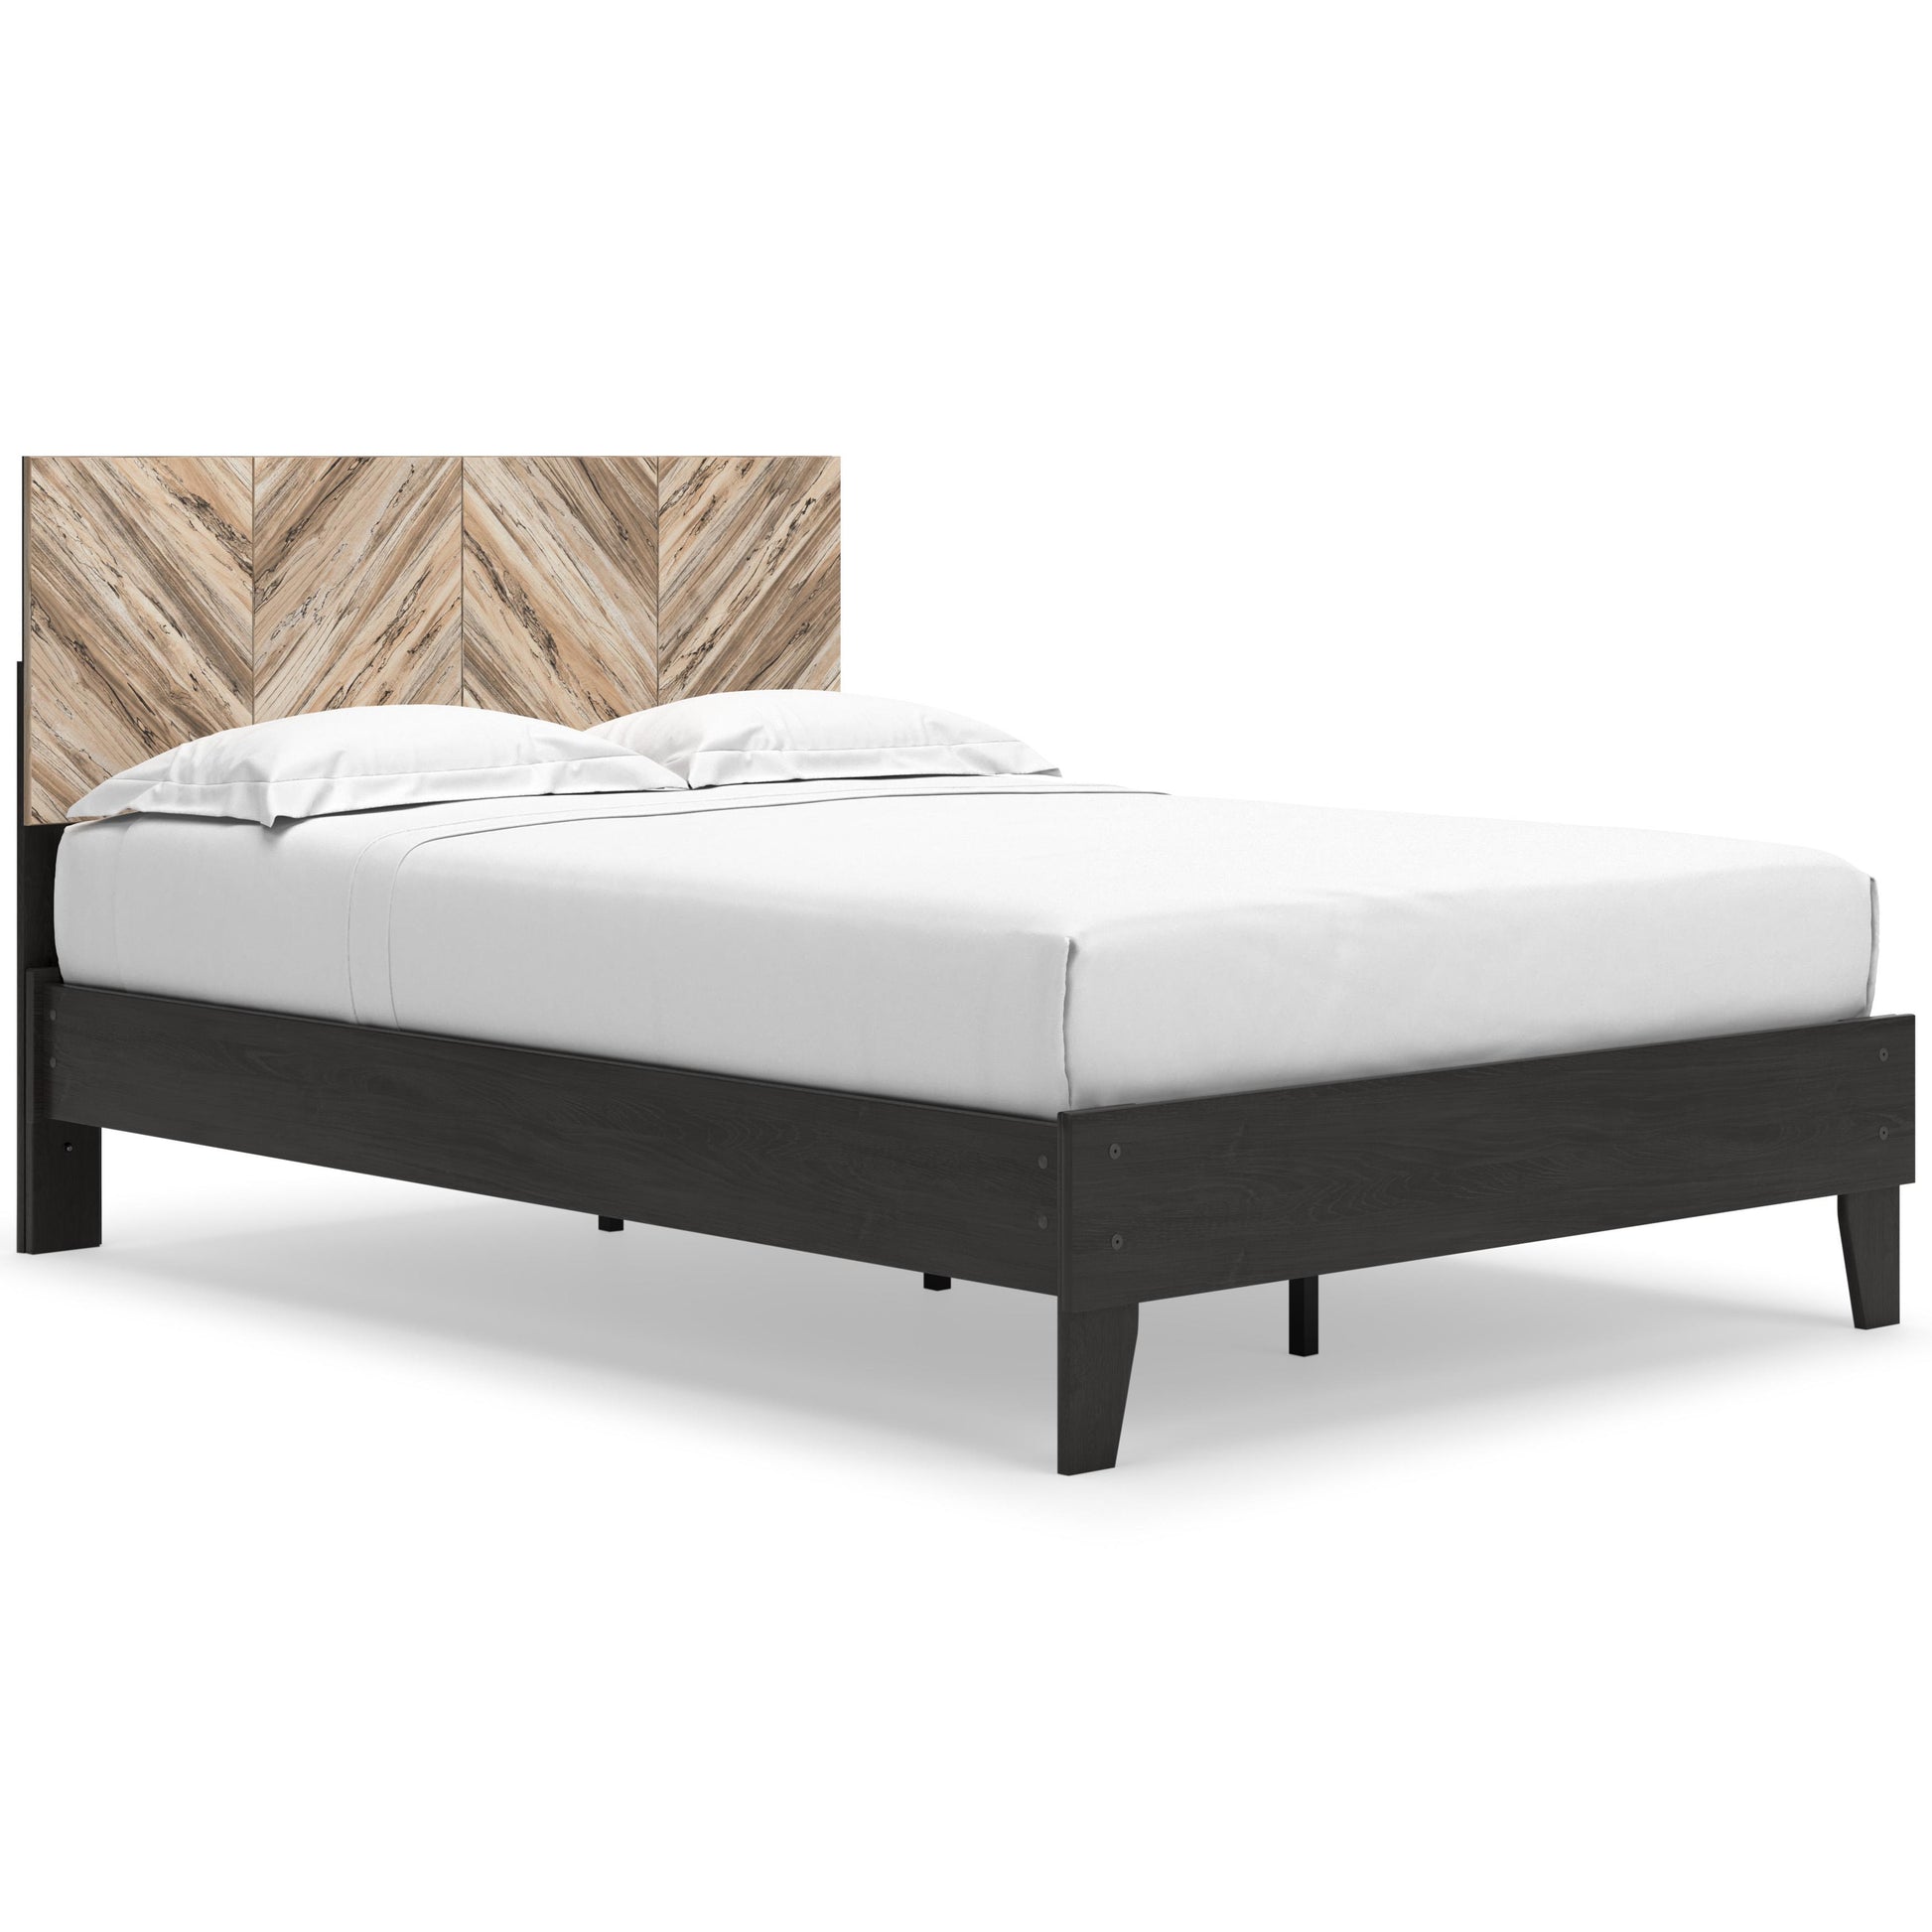 Signature Design by Ashley Kids Beds Bed EB5514-156/EB5514-112 IMAGE 1